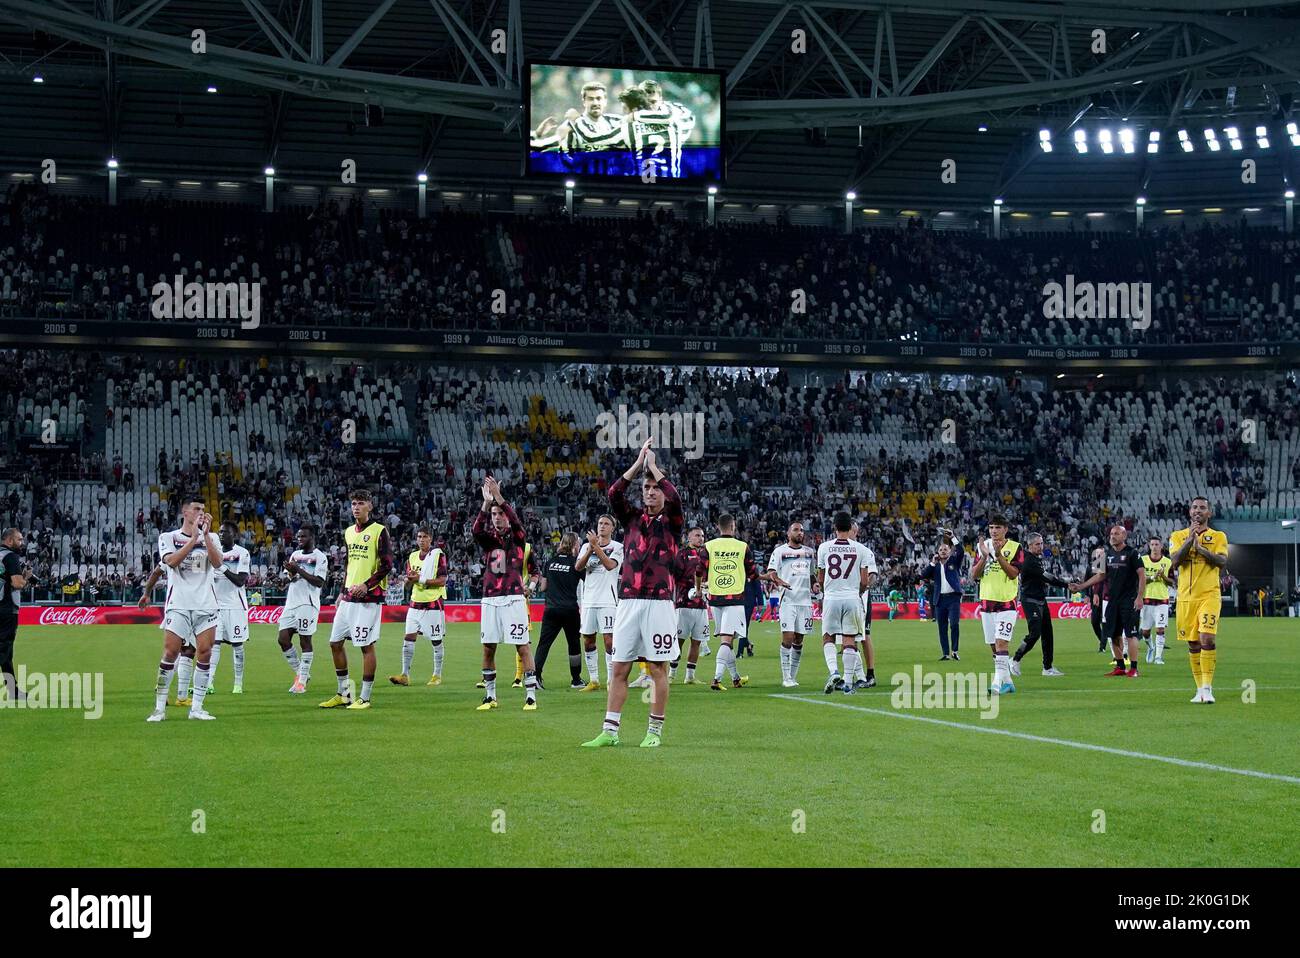 Turin, Italy. 11th Sep, 2022. Players of Salernitana celebrate during the Serie A match between Juventus and US Salernitana 1919 at the Juventus Stadium, Turin, Italy on 11 September 2022. Credit: Giuseppe Maffia/Alamy Live News Stock Photo